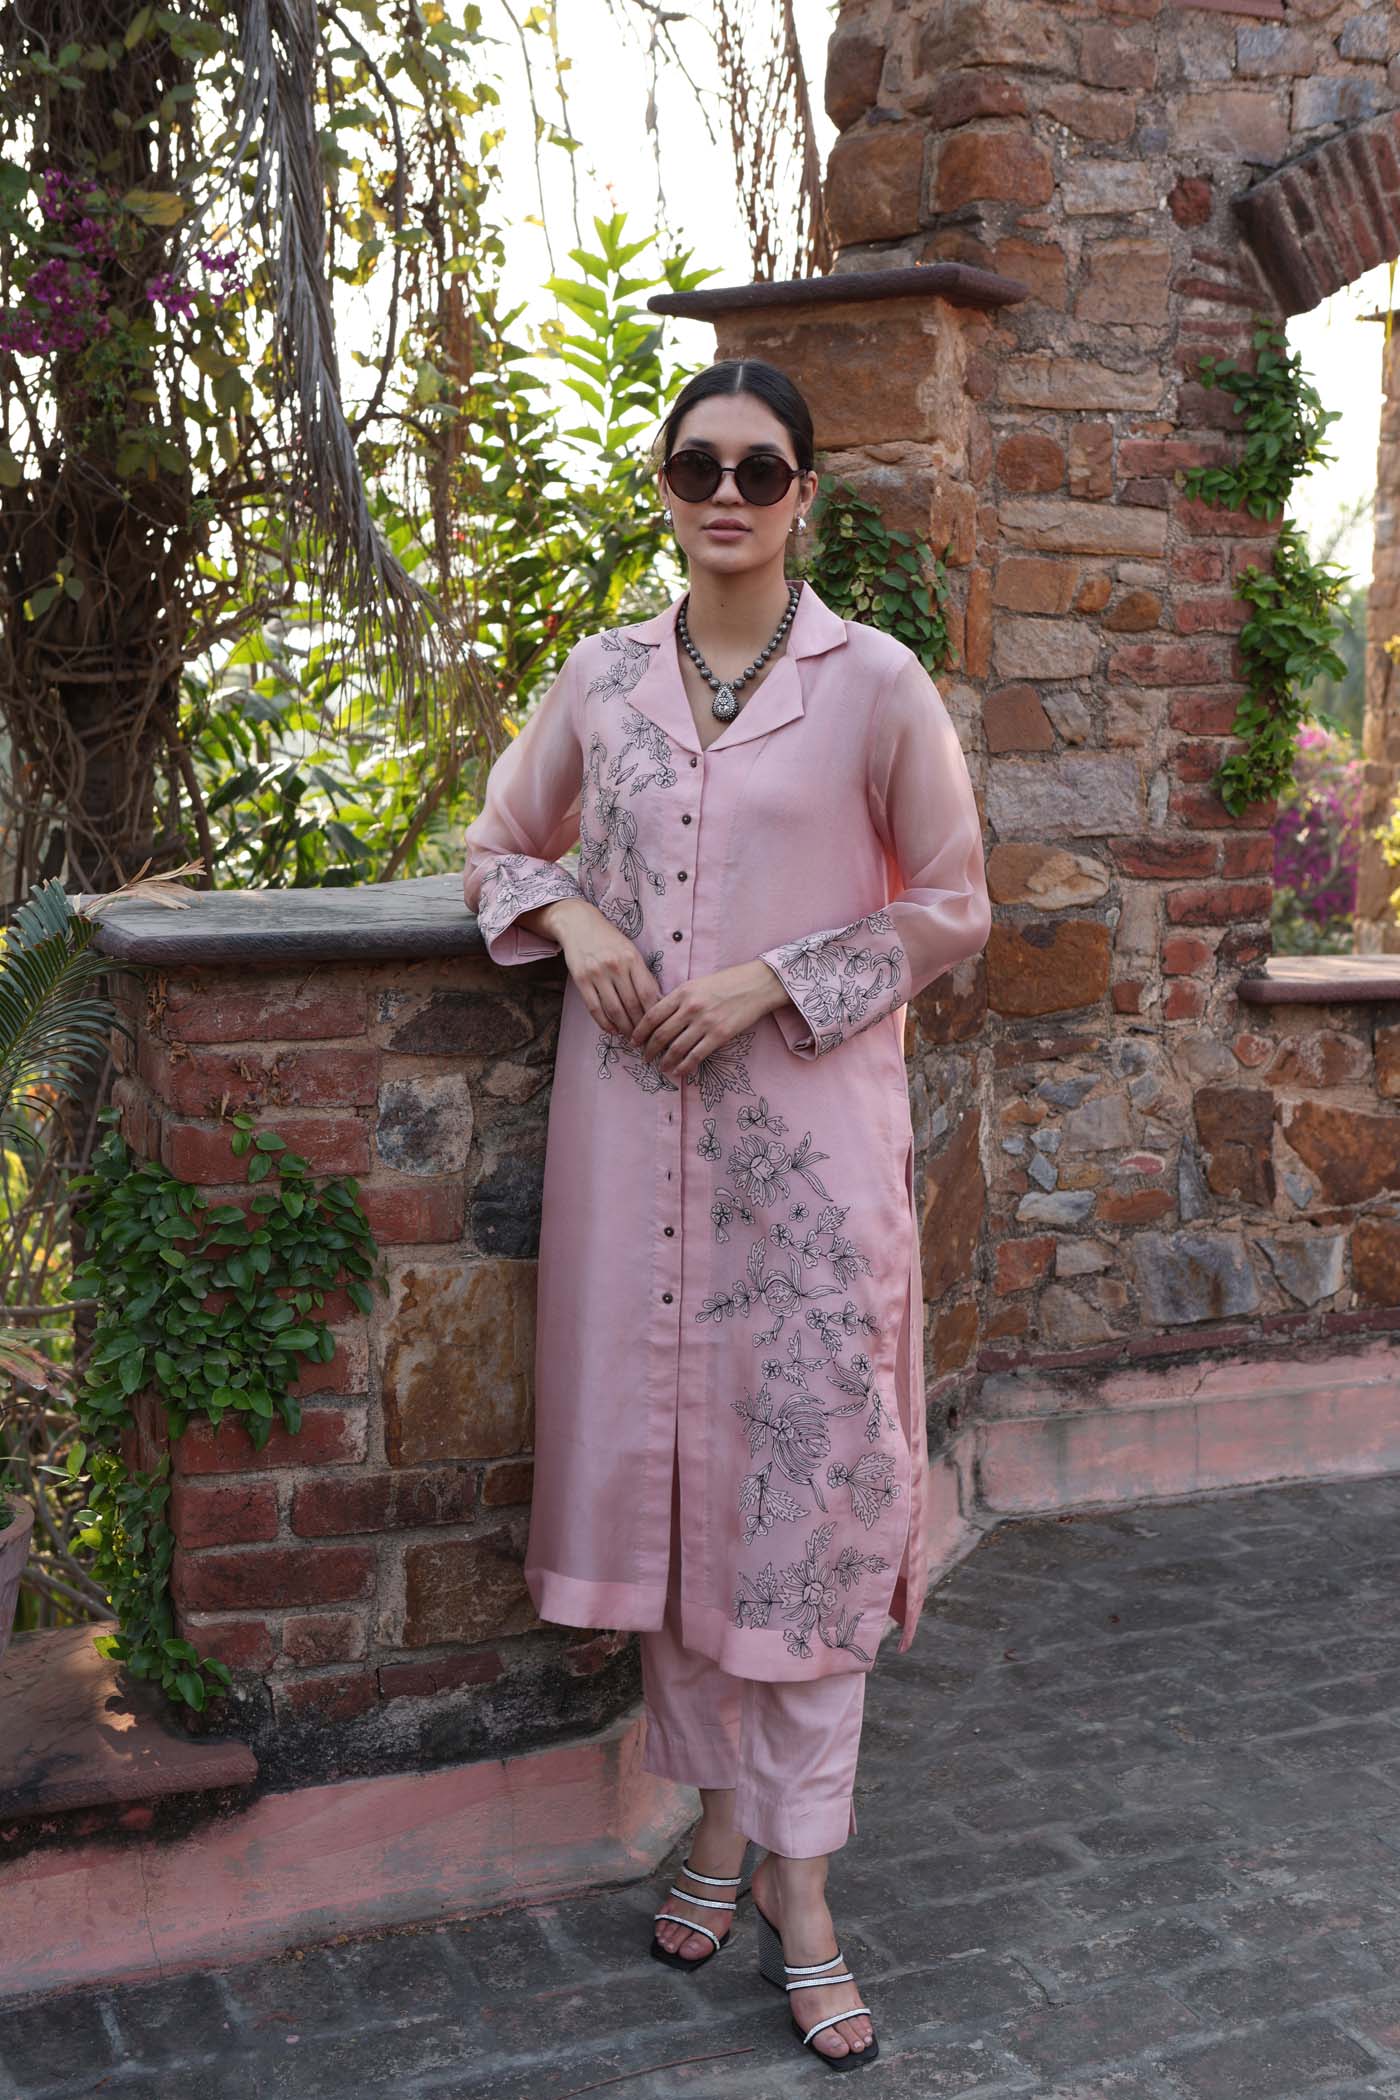 Dusty-Pink Pure Silk Organza Embroidered (Applique & Cuwork) Short-Sleeved Front- Open Collared Kurta-Pants Set